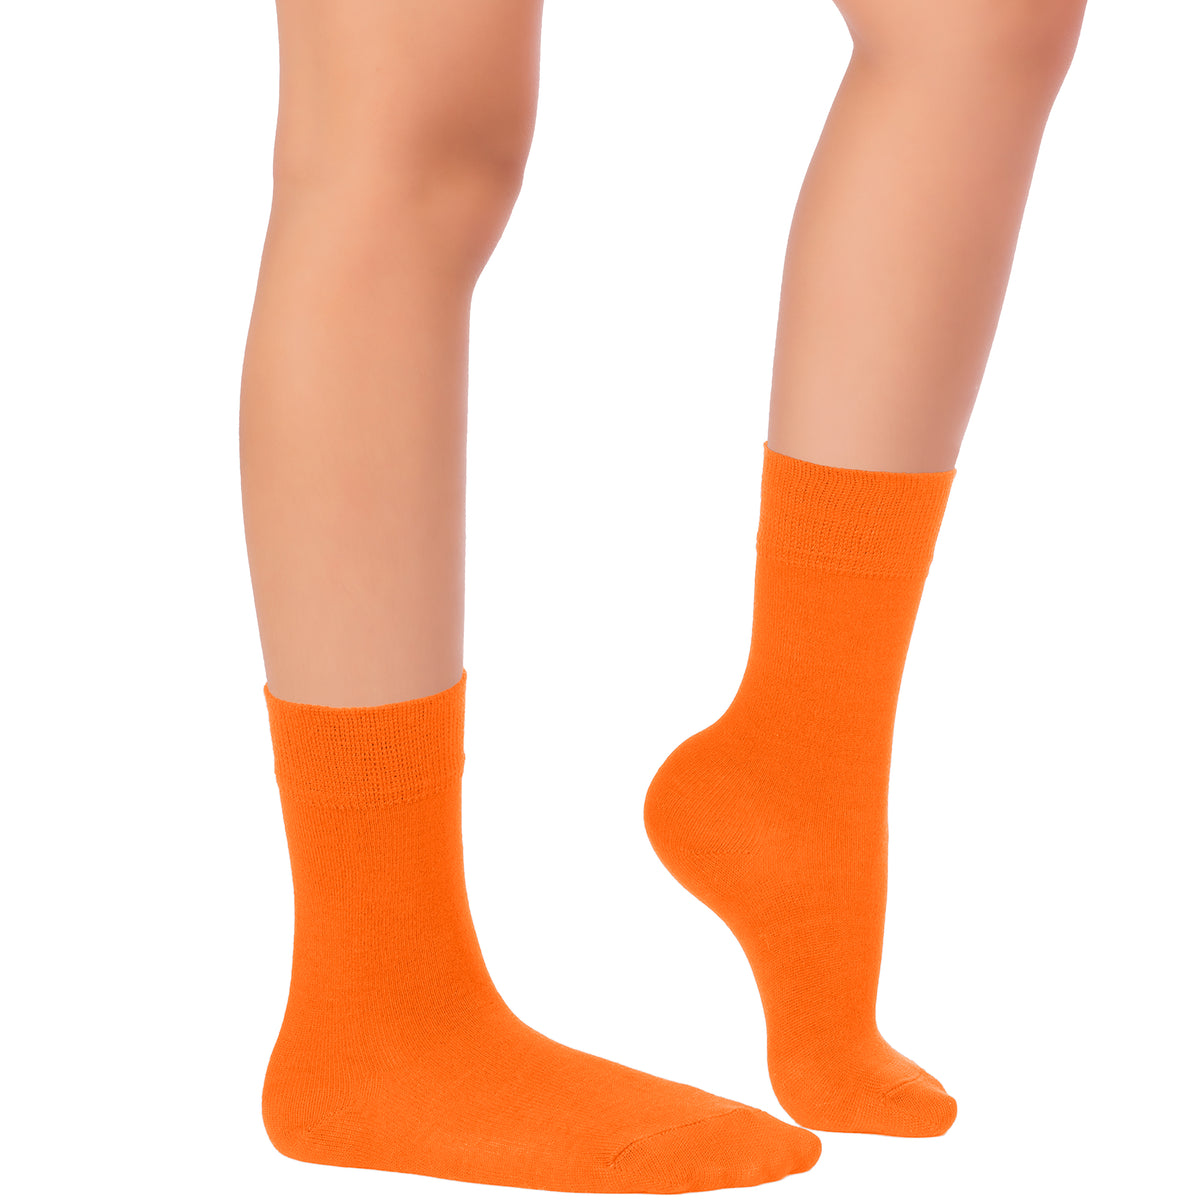 An image of a woman's legs wearing orange Kids' Dress Crew Bamboo socks on a white background.